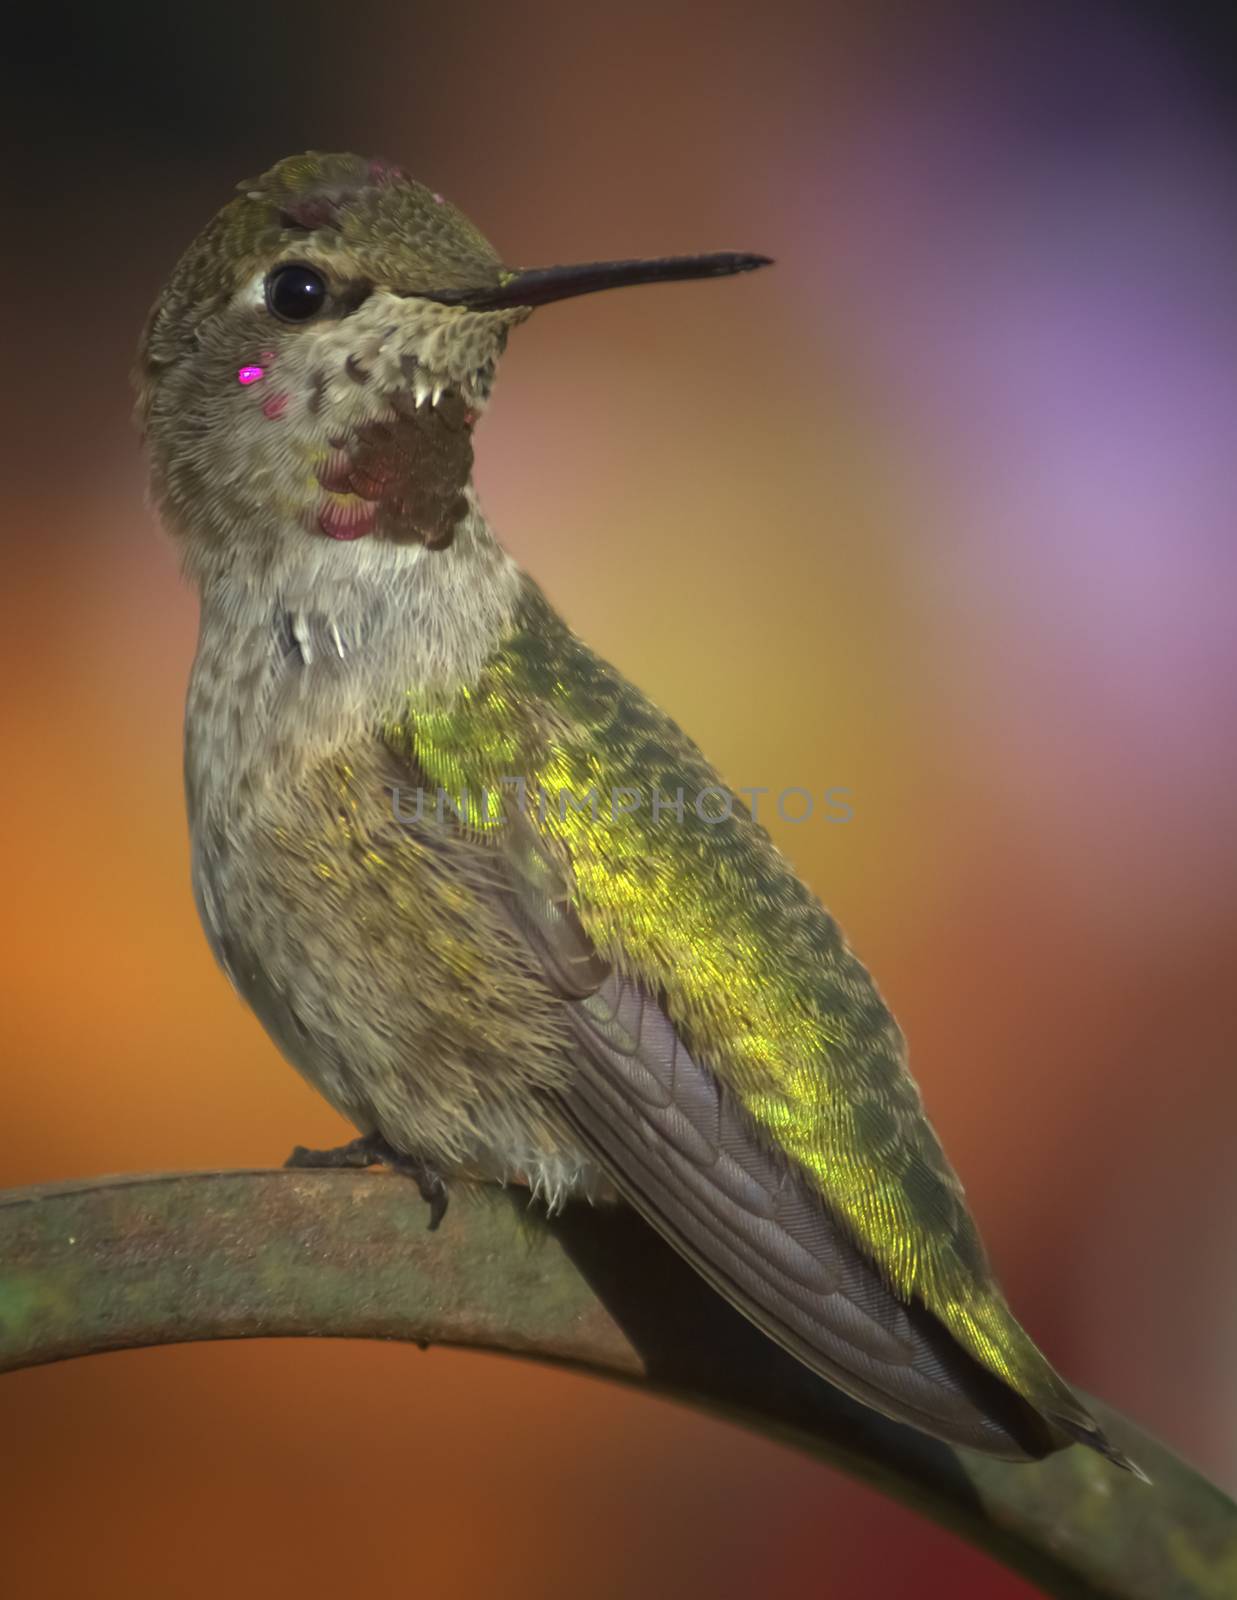 A hummingbird is perched and looking at the camera. Color image. Day.